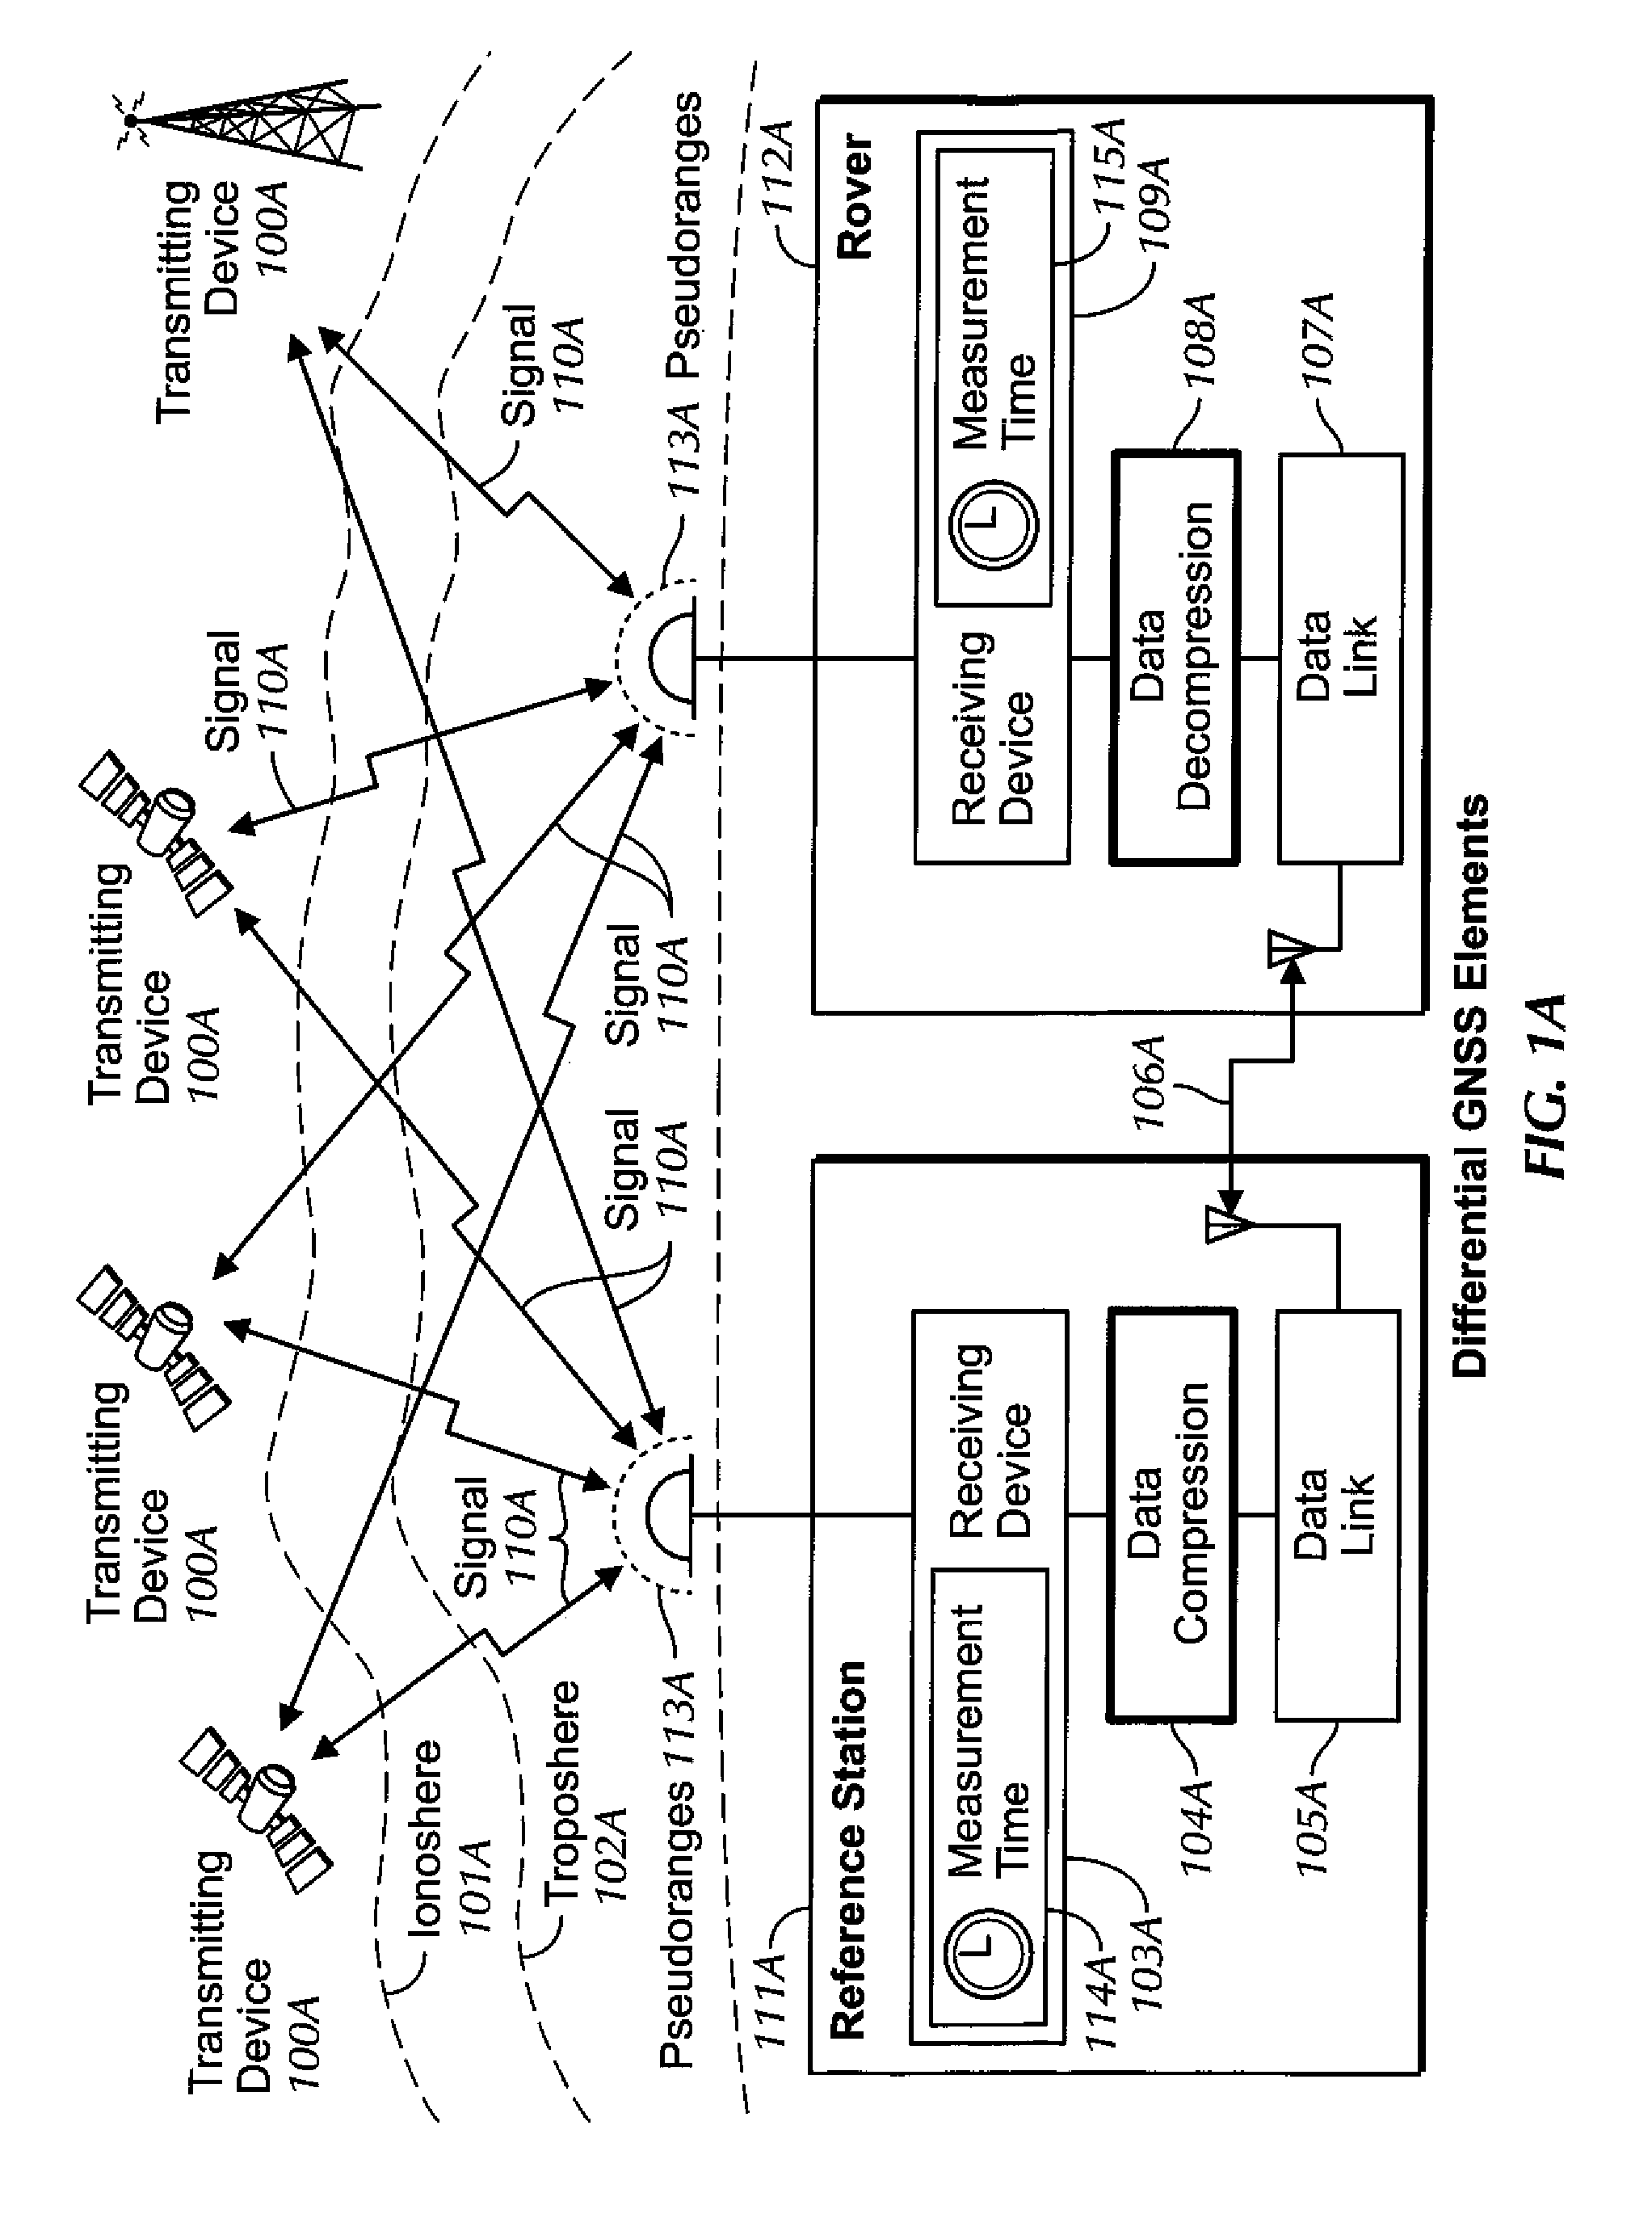 Method and apparatus for reducing satellite position message payload by adaptive data compression techniques